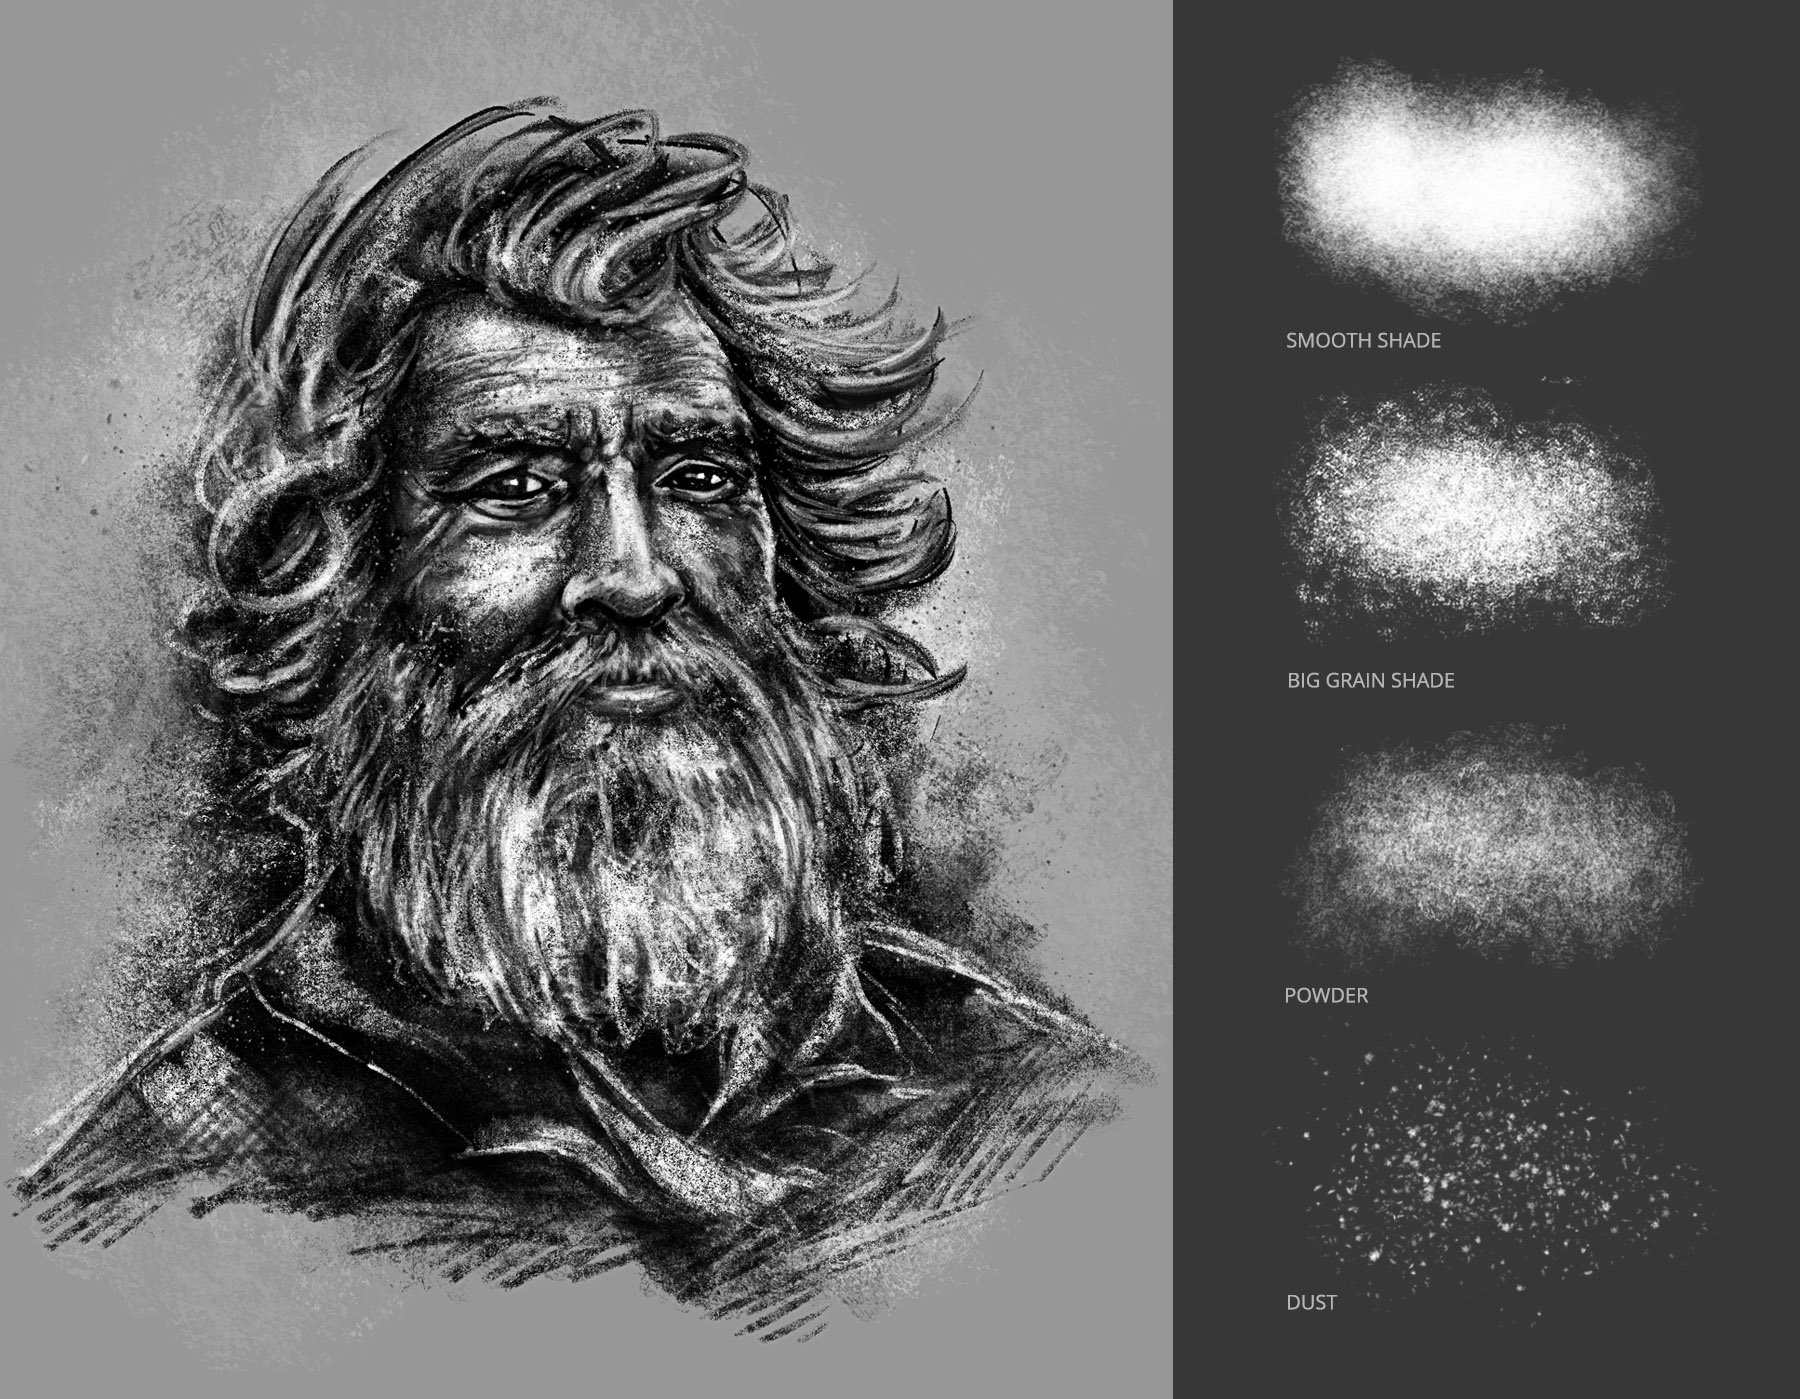 Ultimate Brush Toolbox - Charcoal Brushes